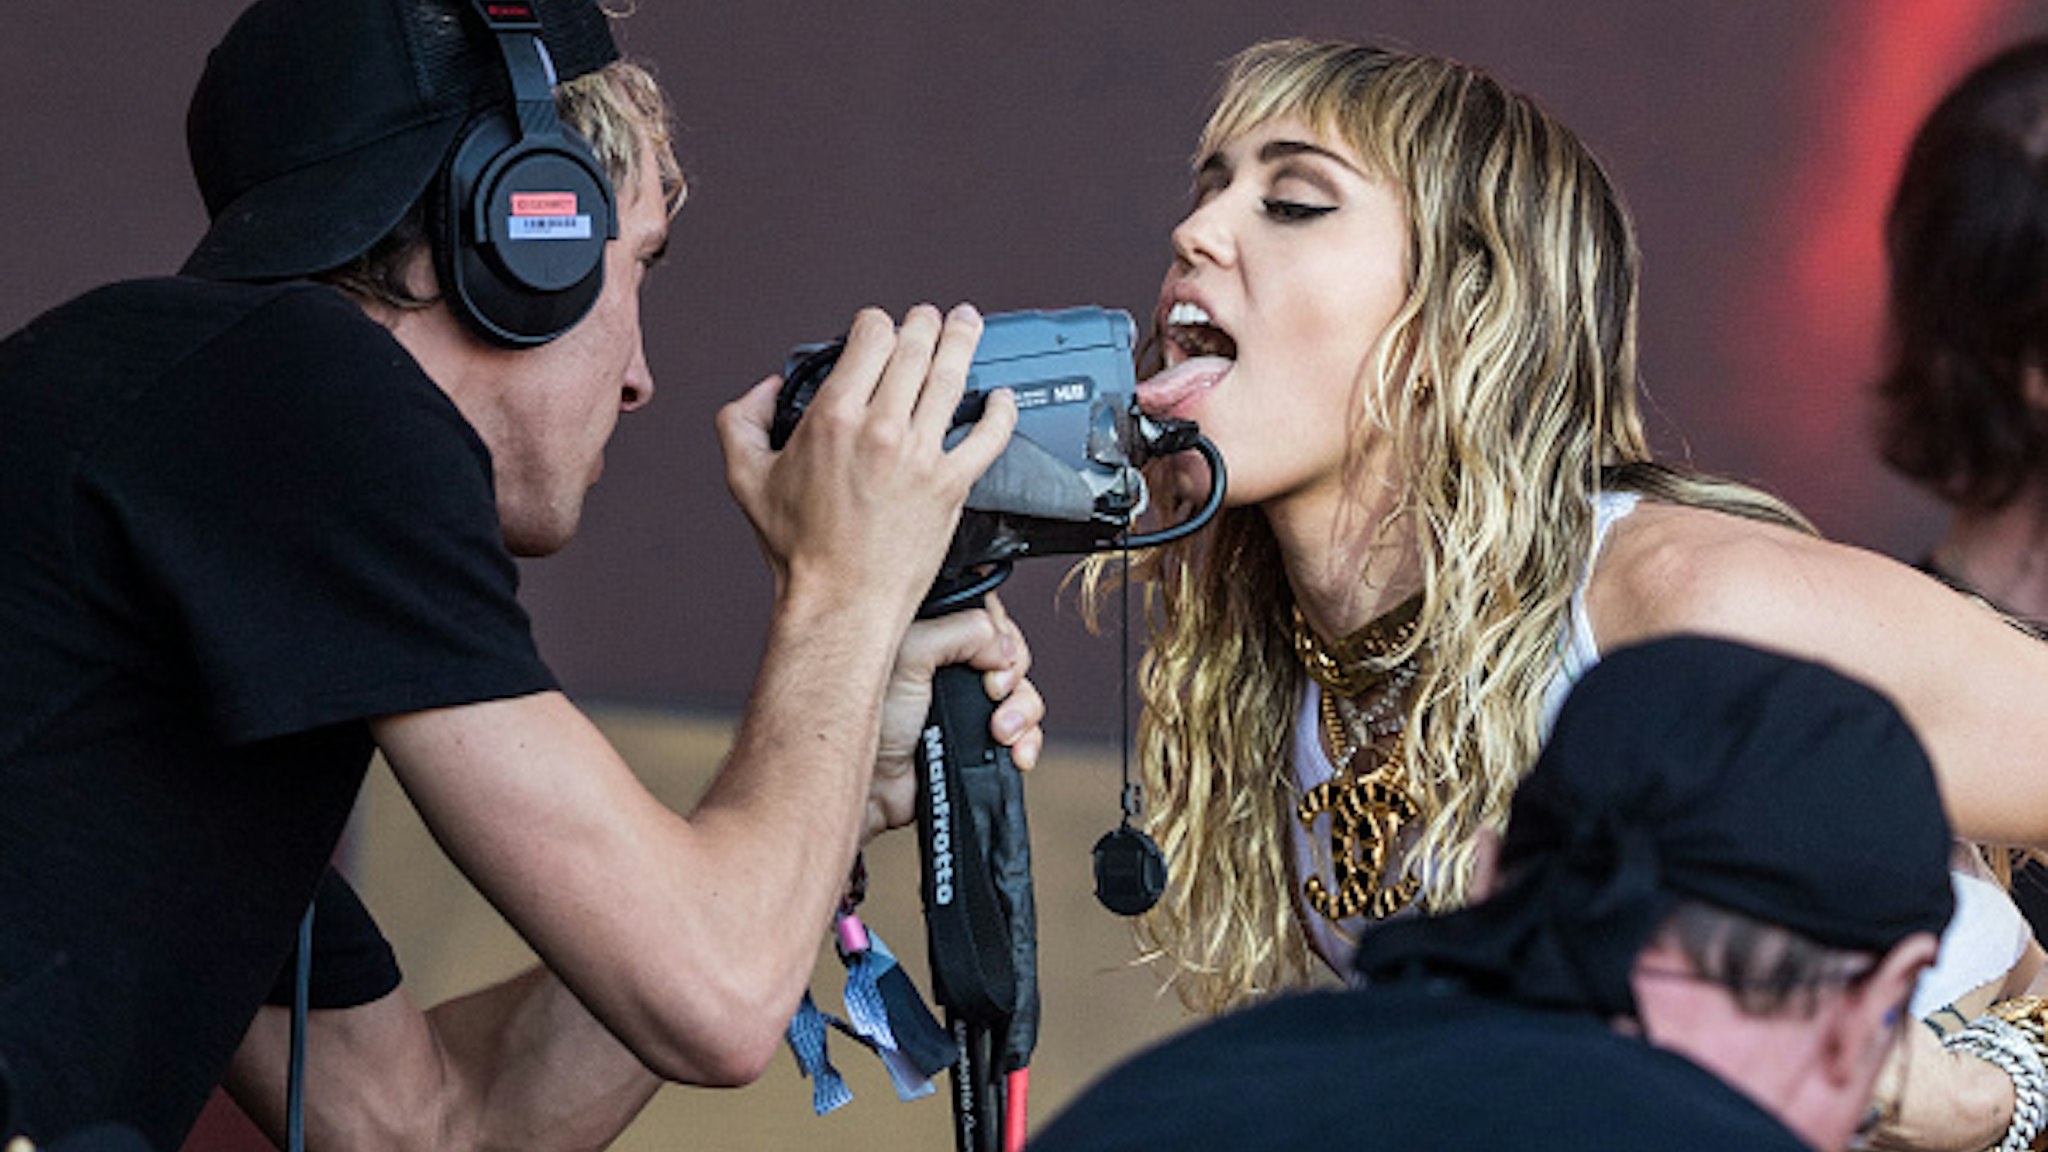 Miley Cyrus performs on the Pyramid stage on day five of Glastonbury Festival at Worthy Farm, Pilton on June 30, 2019 in Glastonbury, England.